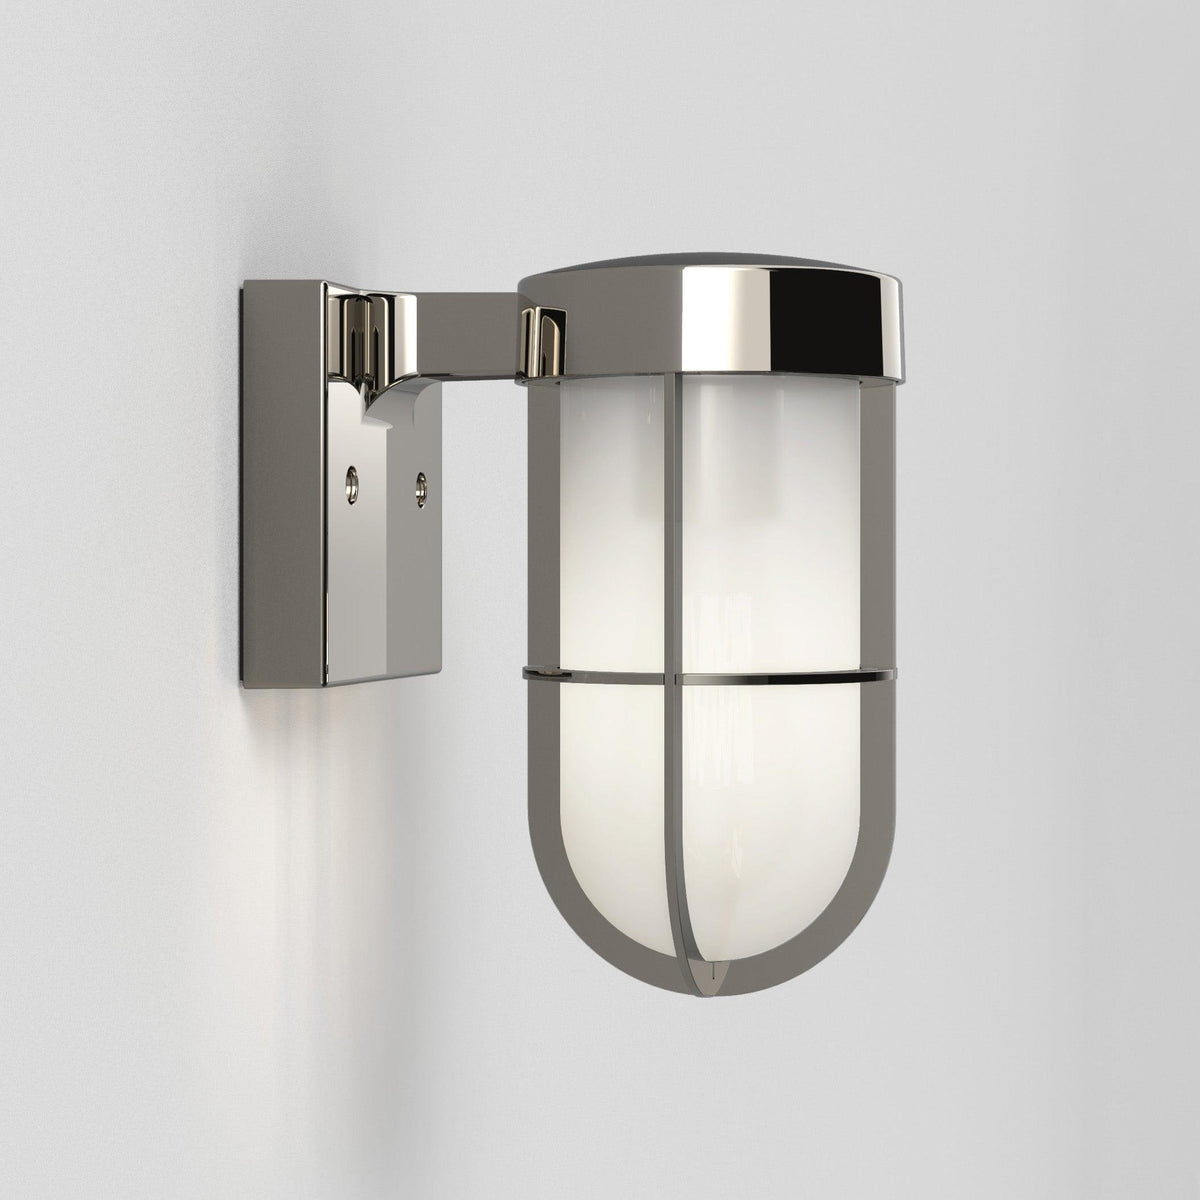 Astro Lighting - Cabin Frosted Wall Light - 1368017 | Montreal Lighting & Hardware